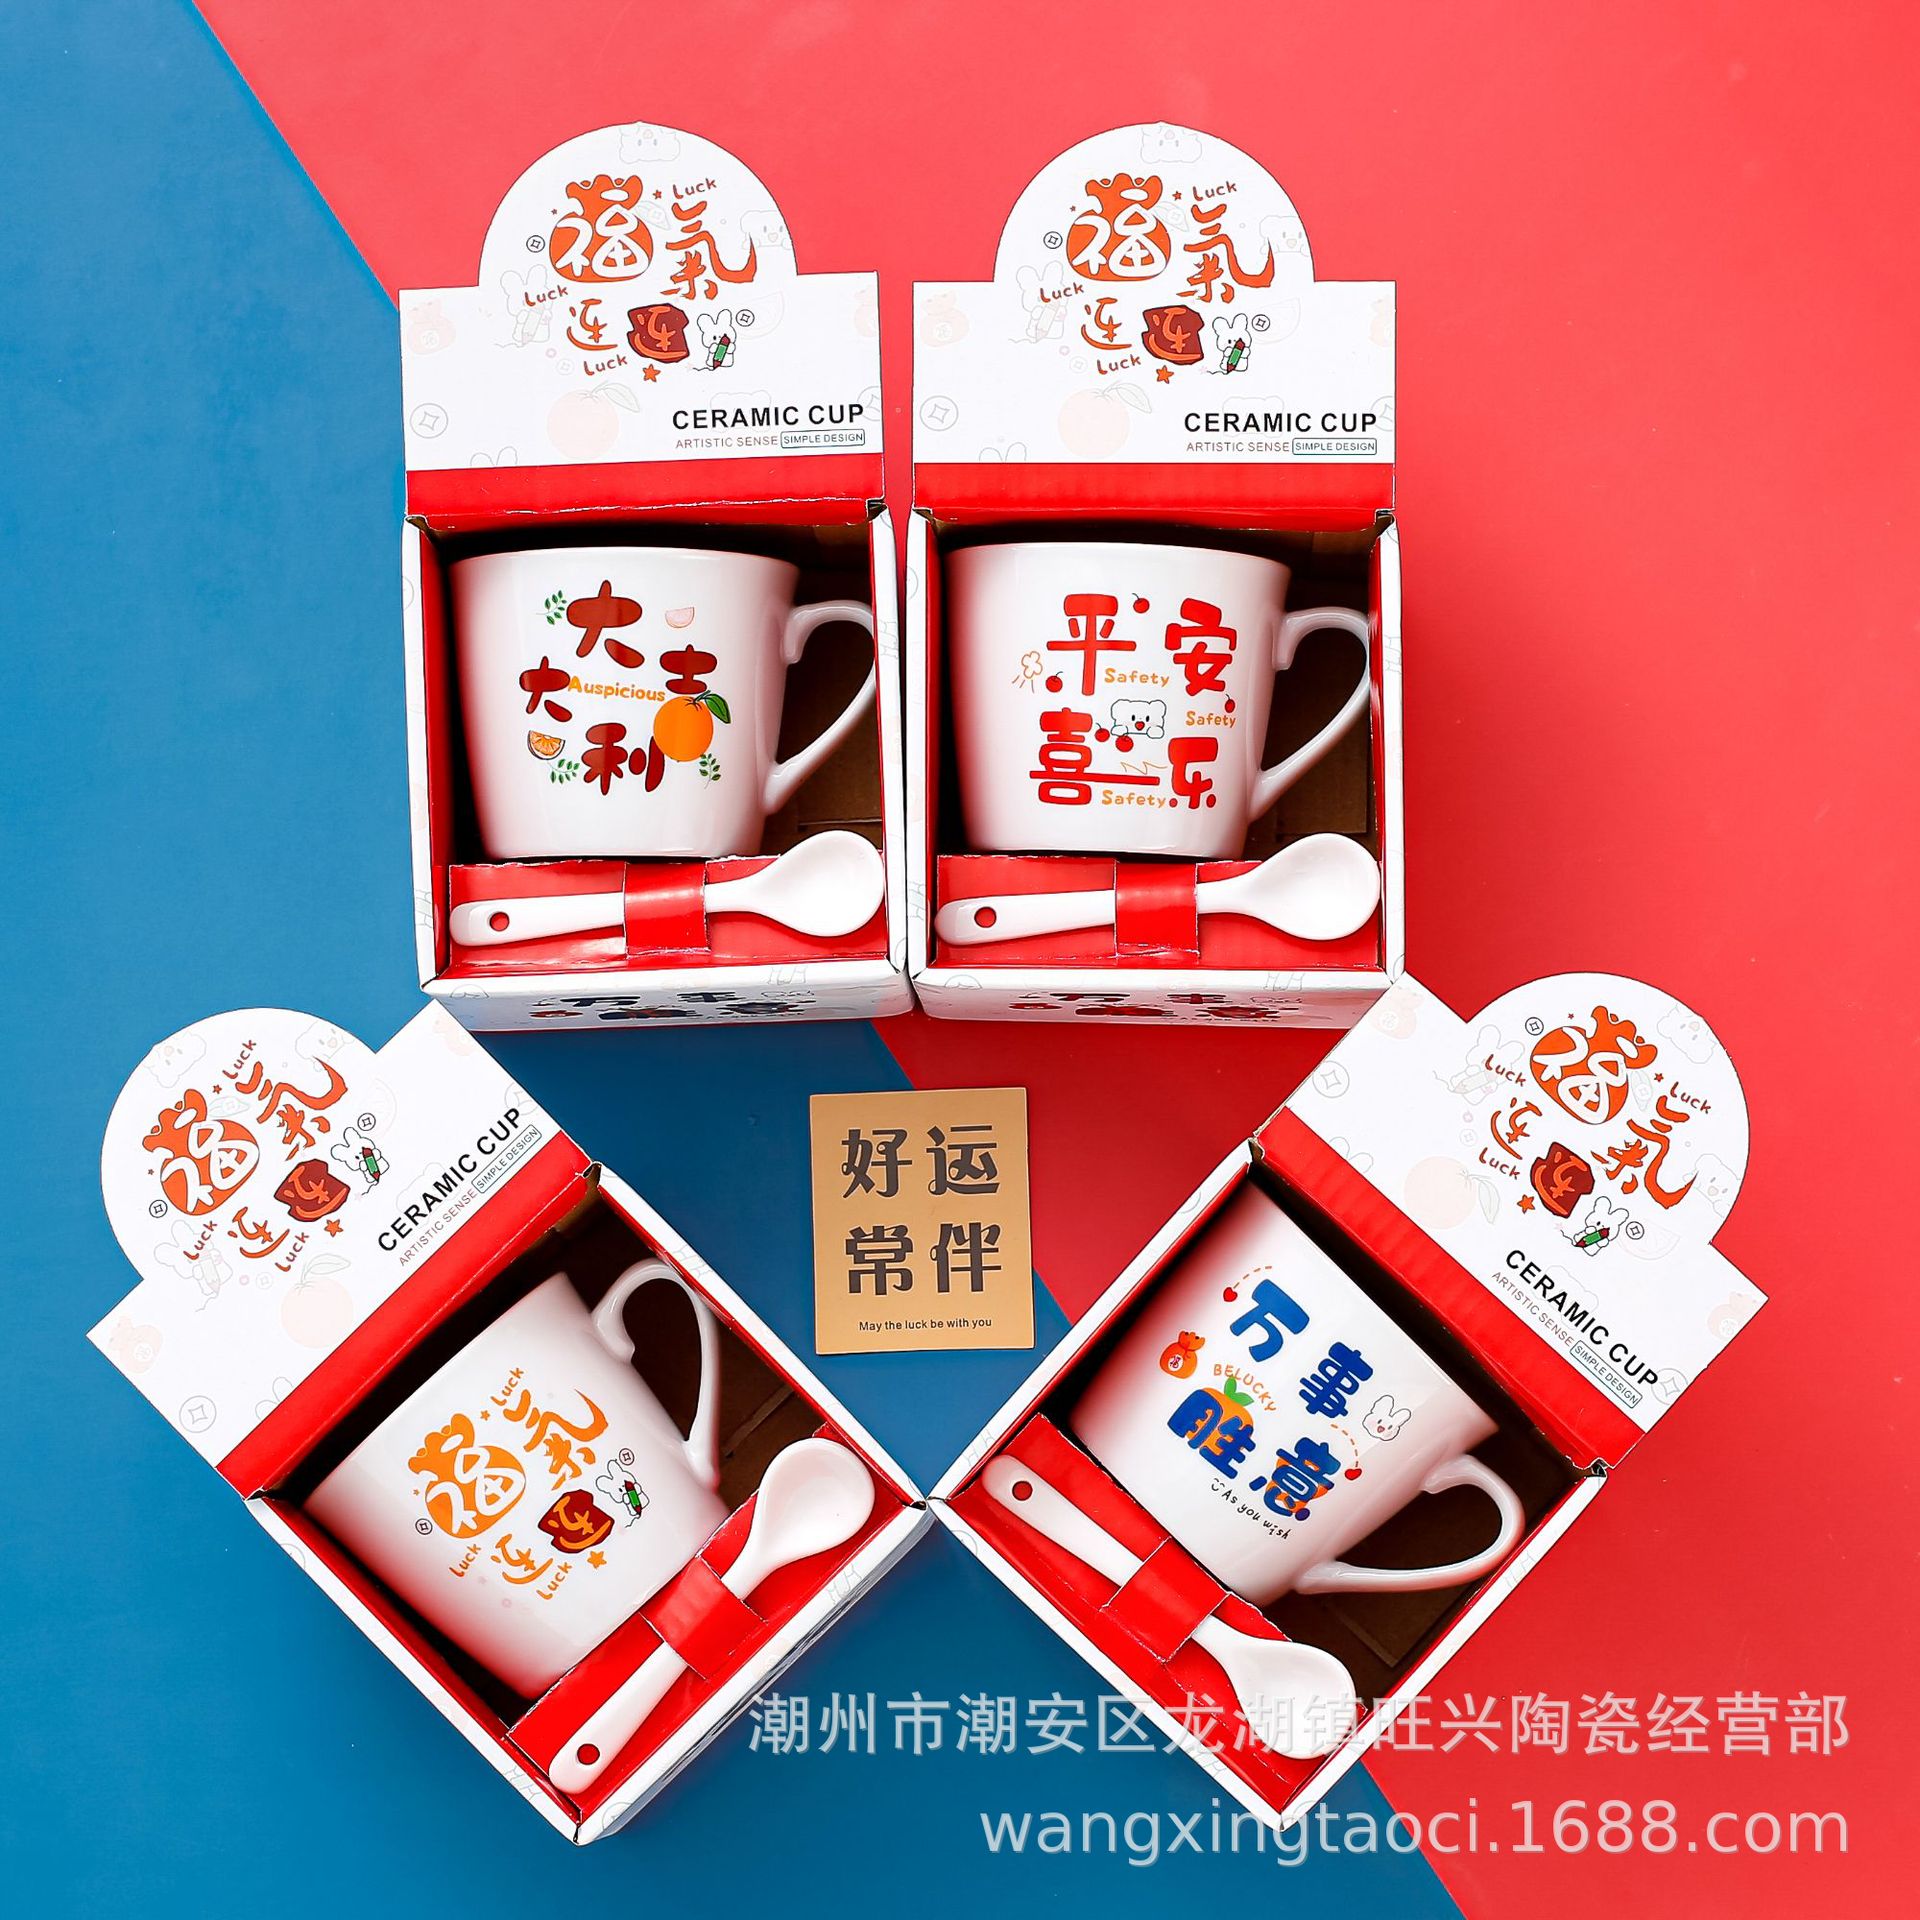 Creative Cartoon Ceramic Cup Mug Logo Festival Event Small Gift Practical Advertising Cup Department Store Wholesale